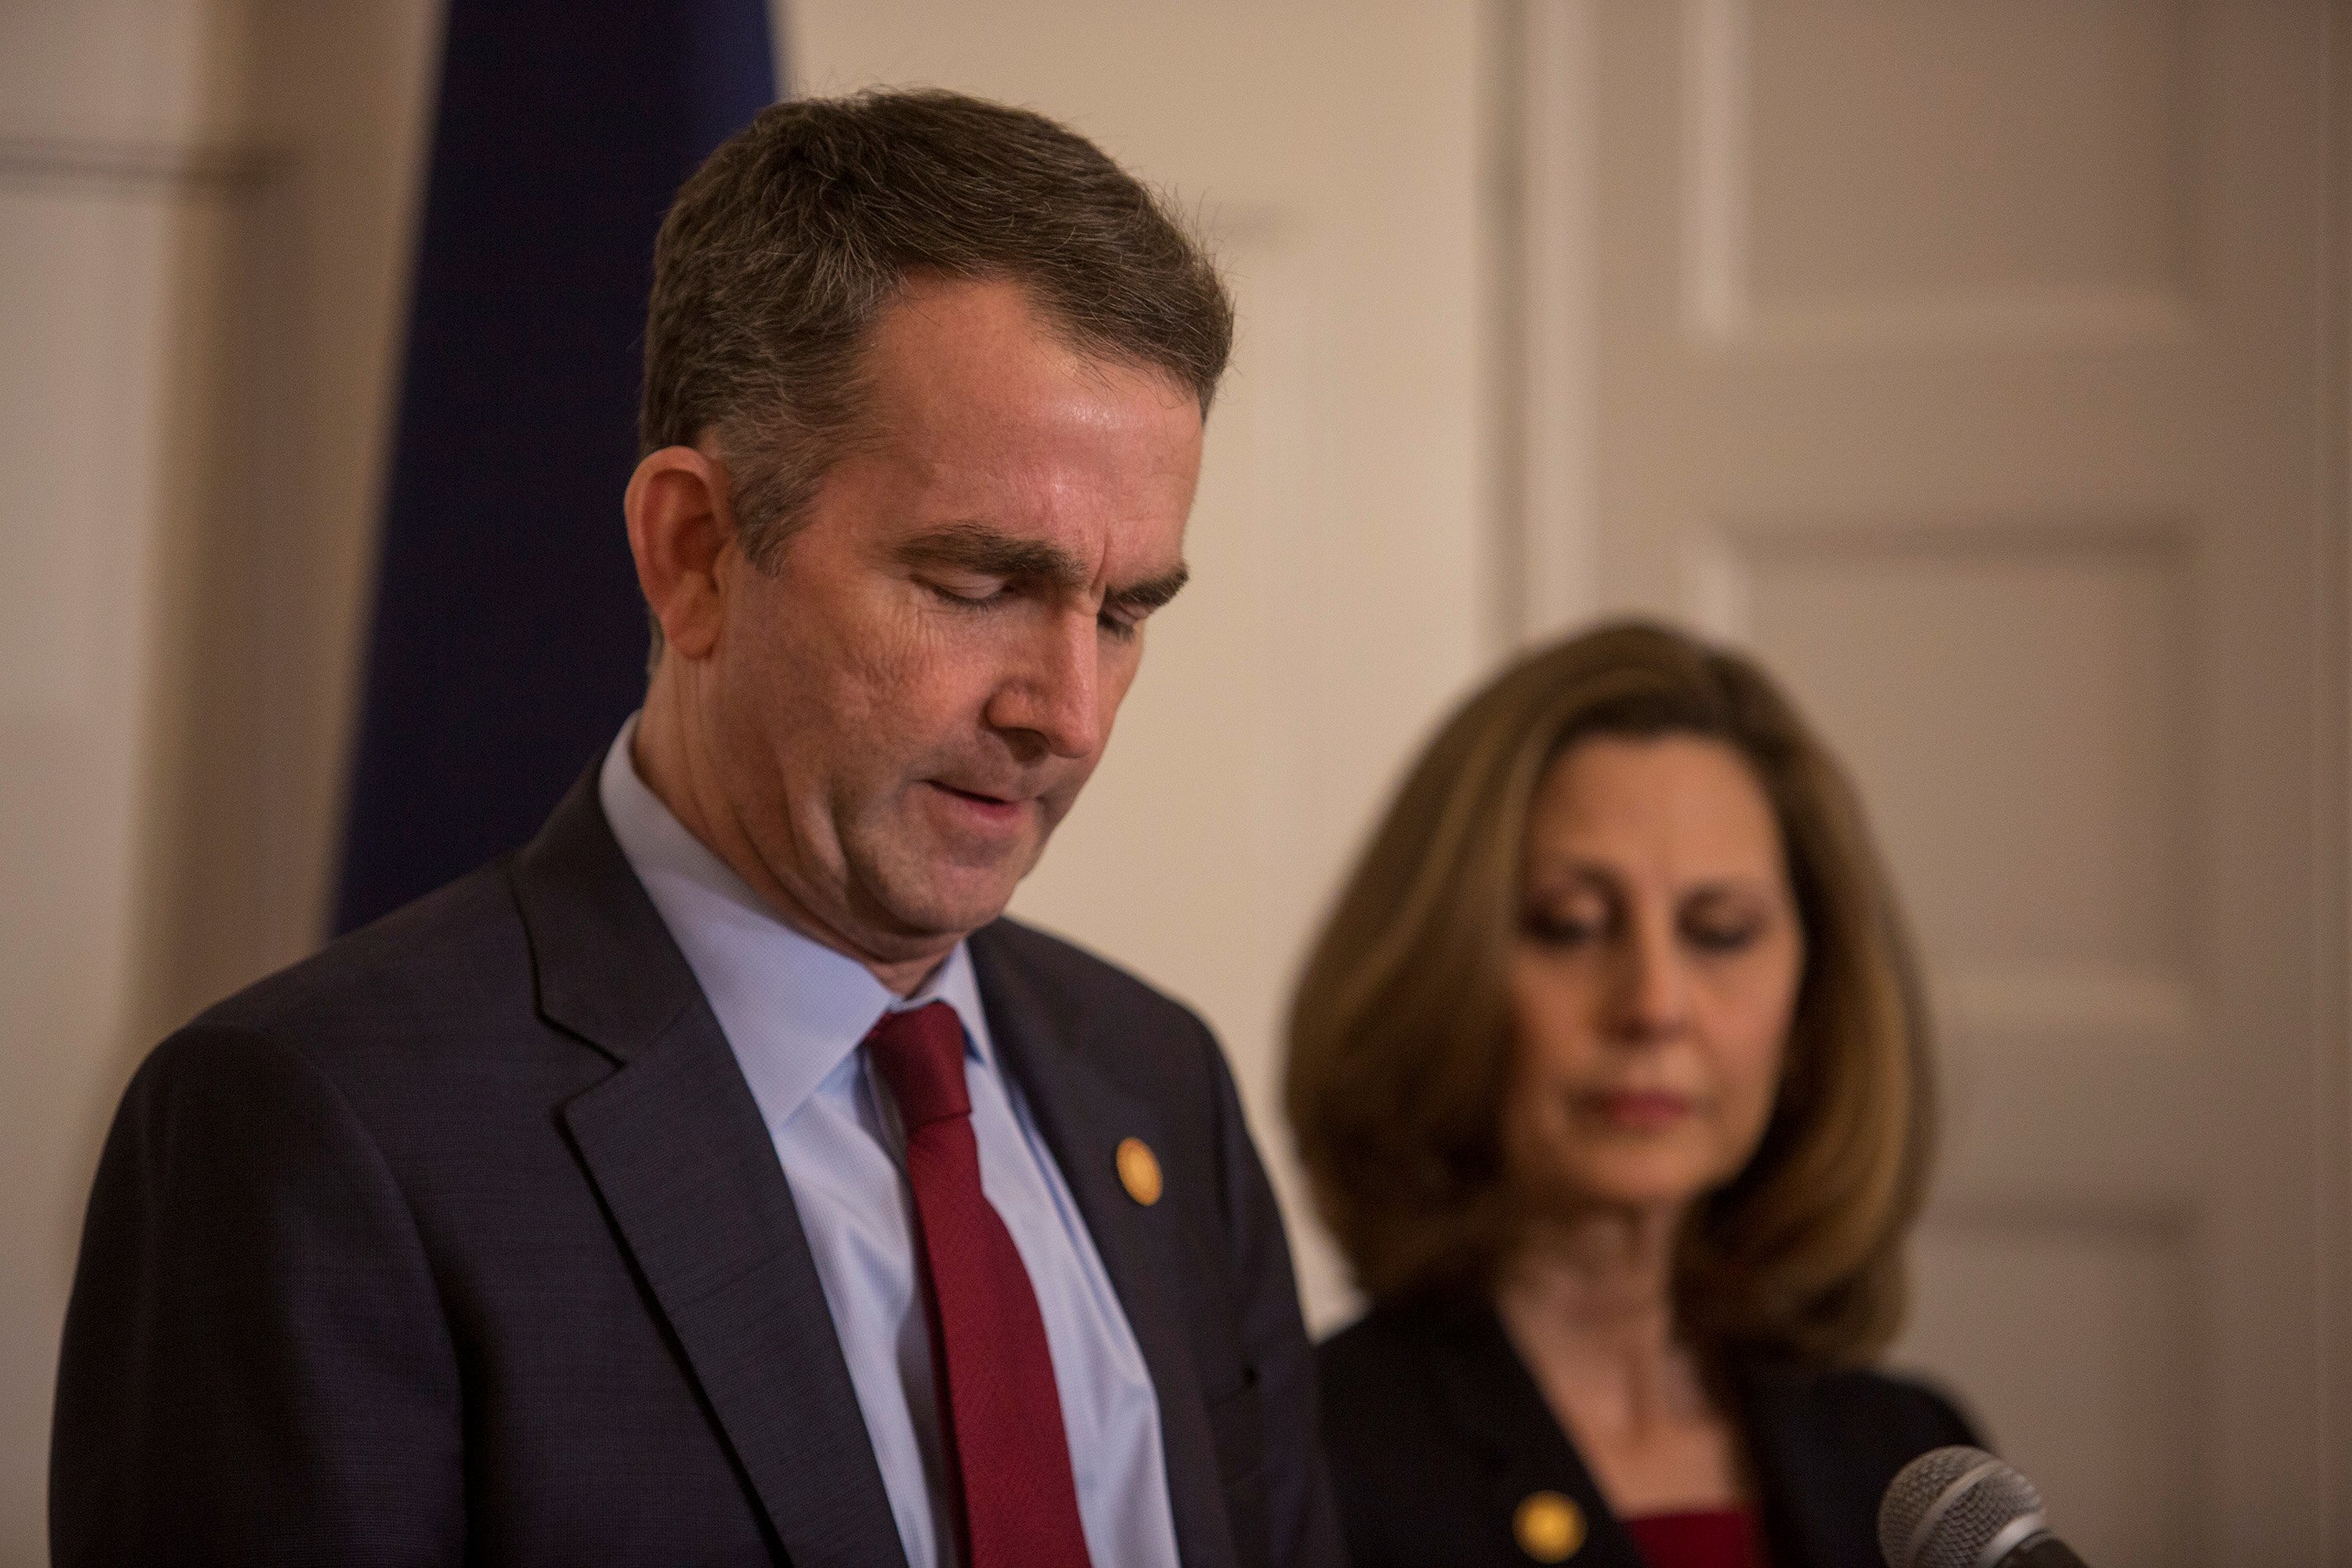 Virginia Governor Ralph Northam, accompanied by his wife Pamela Northam announces he will not resign during a news conference in Richmond, Virginia, U.S. February 2, 2019. Picture taken February 2, 2019. REUTERS/ Jay Paul